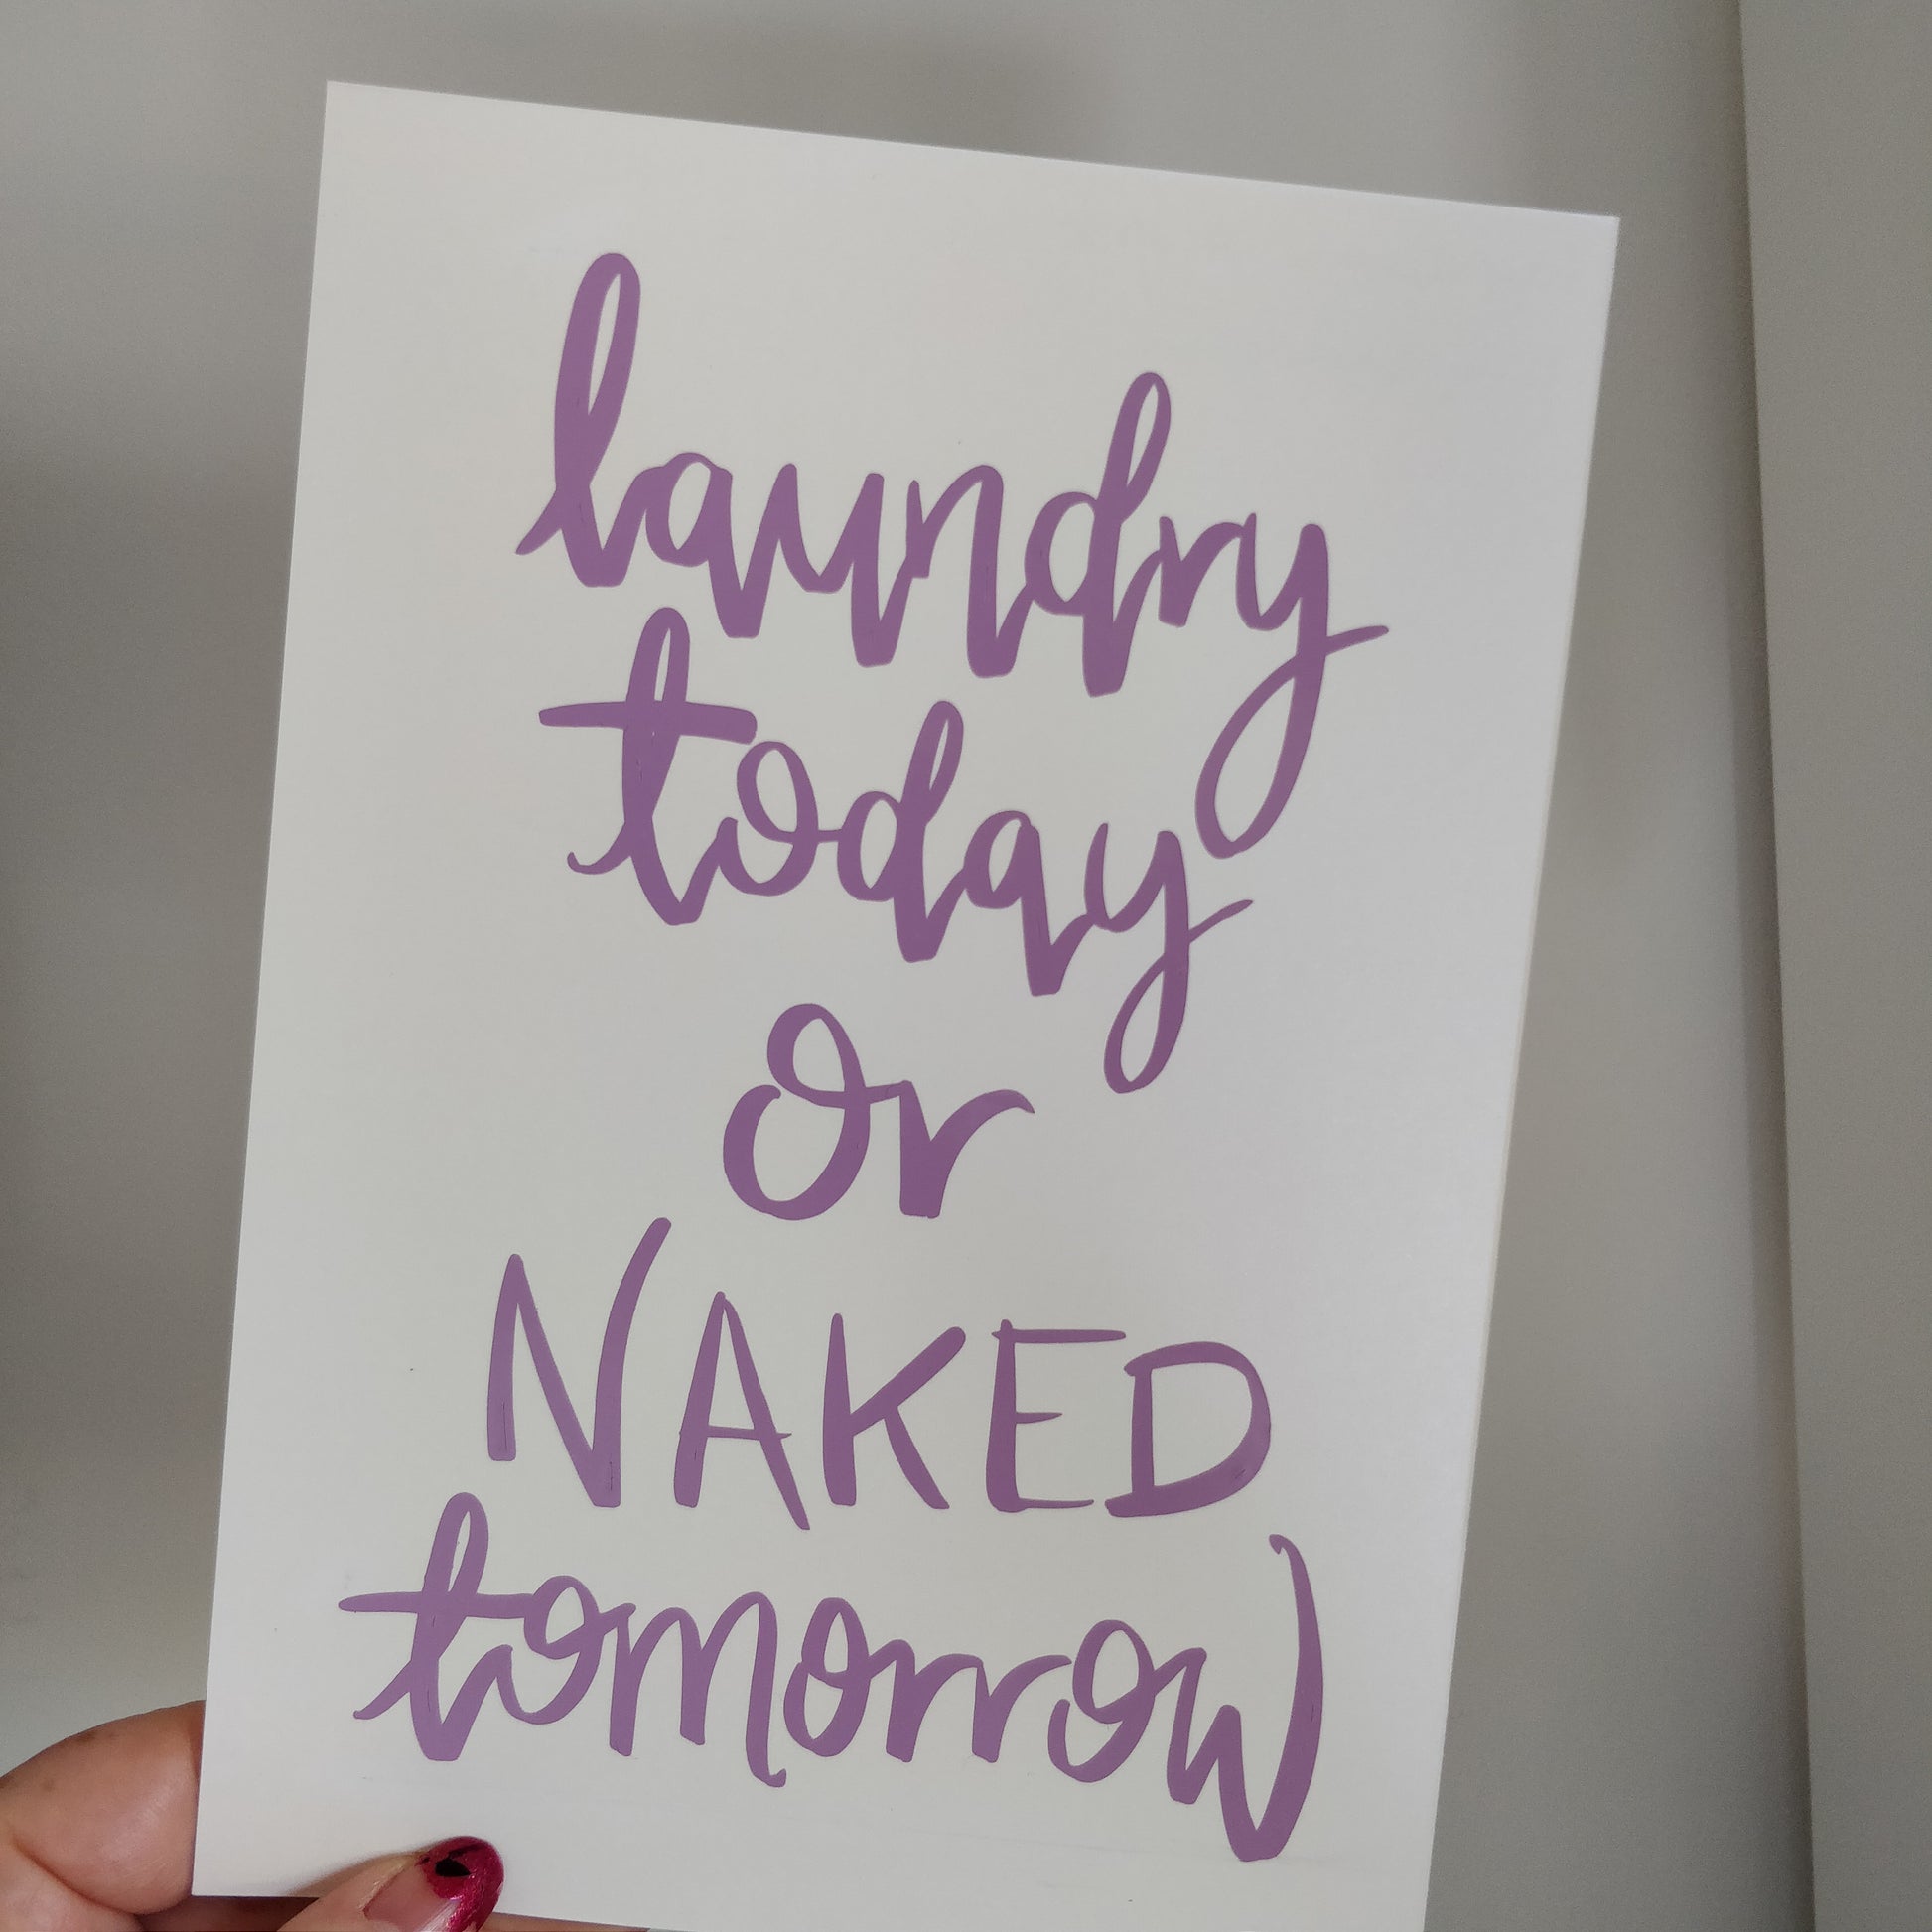 Laundry Today or Naked Tomorrow A5 Print - Fay Dixon Design